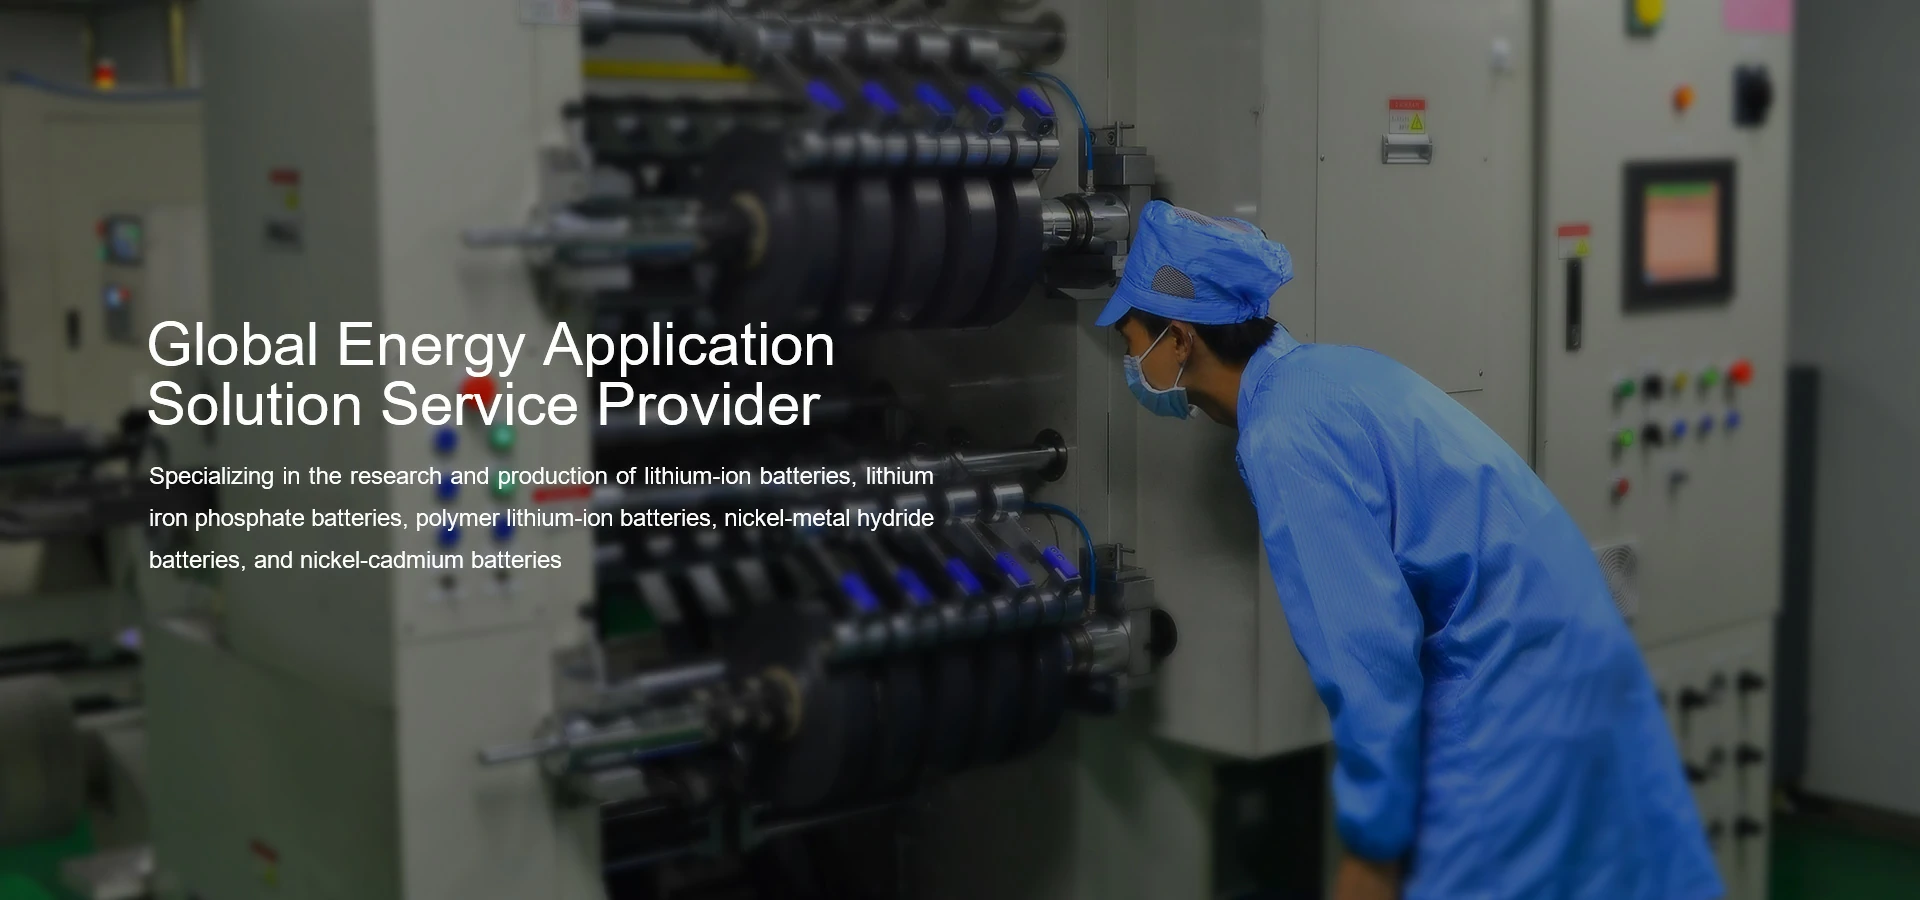 Global energy application solution service provider